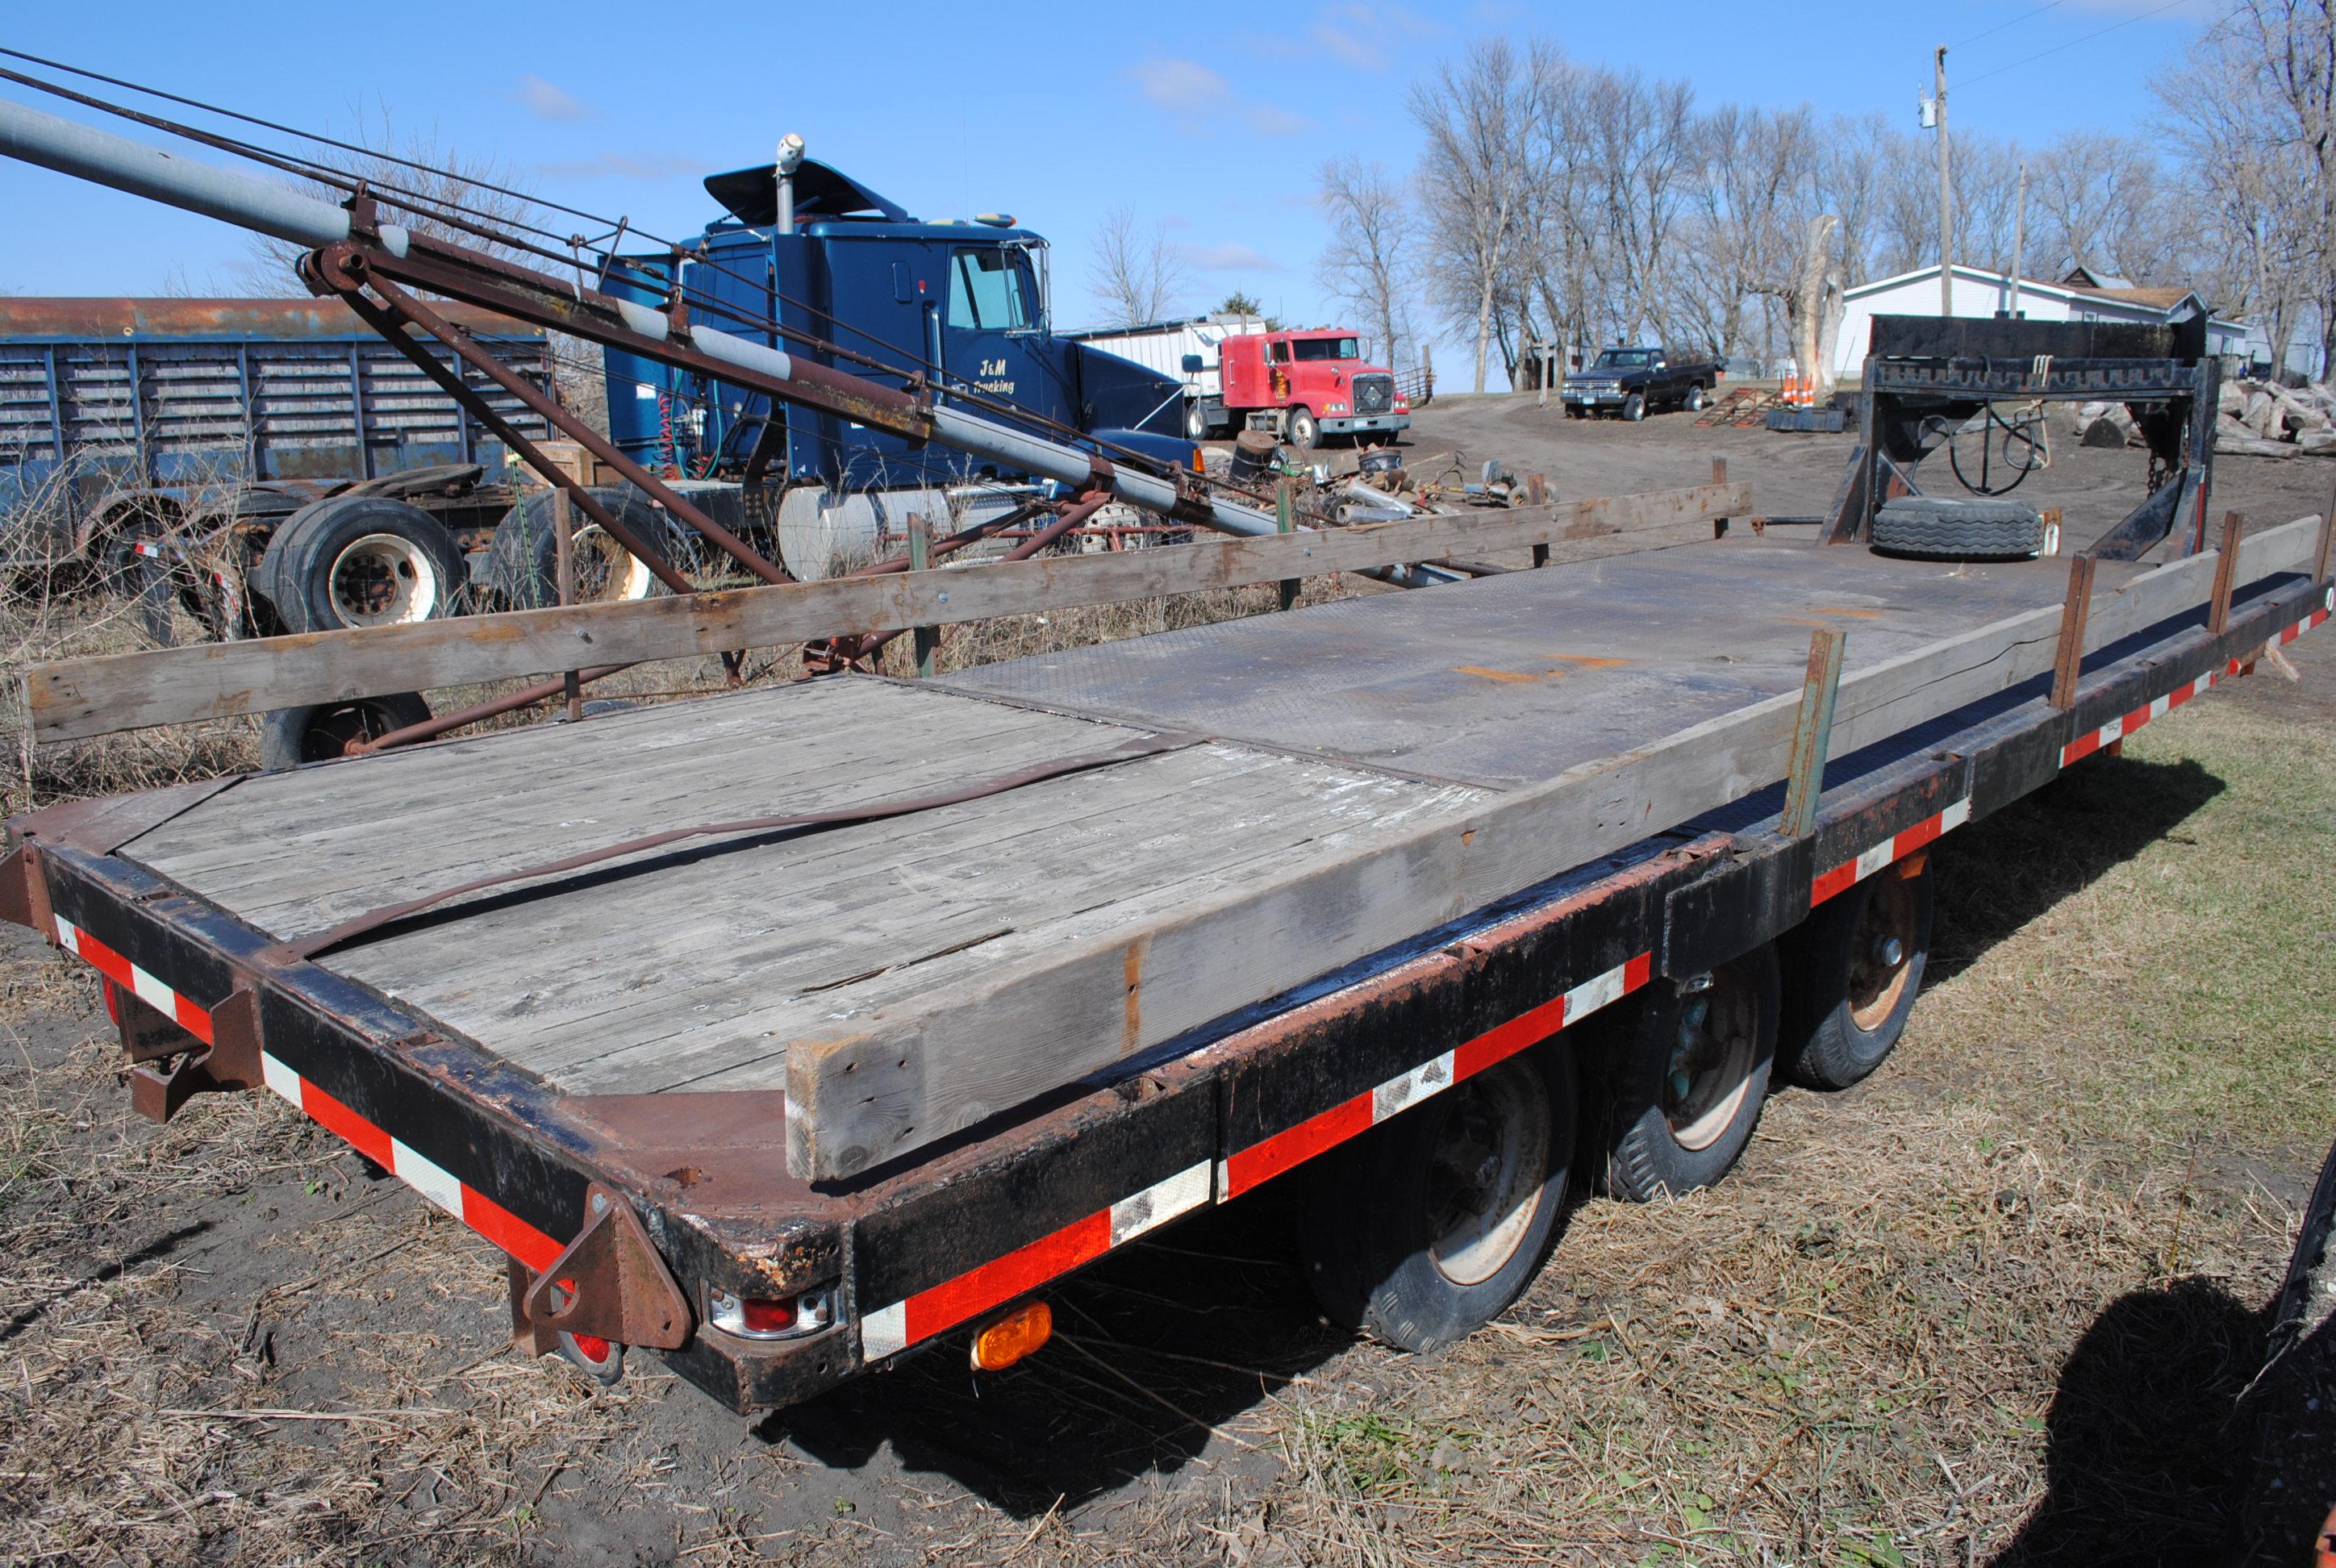 Gooseneck Tri-Axle Trailer approx. 22-1/2' by 7'10", trailer house wheels & tires, homemade. TITLED